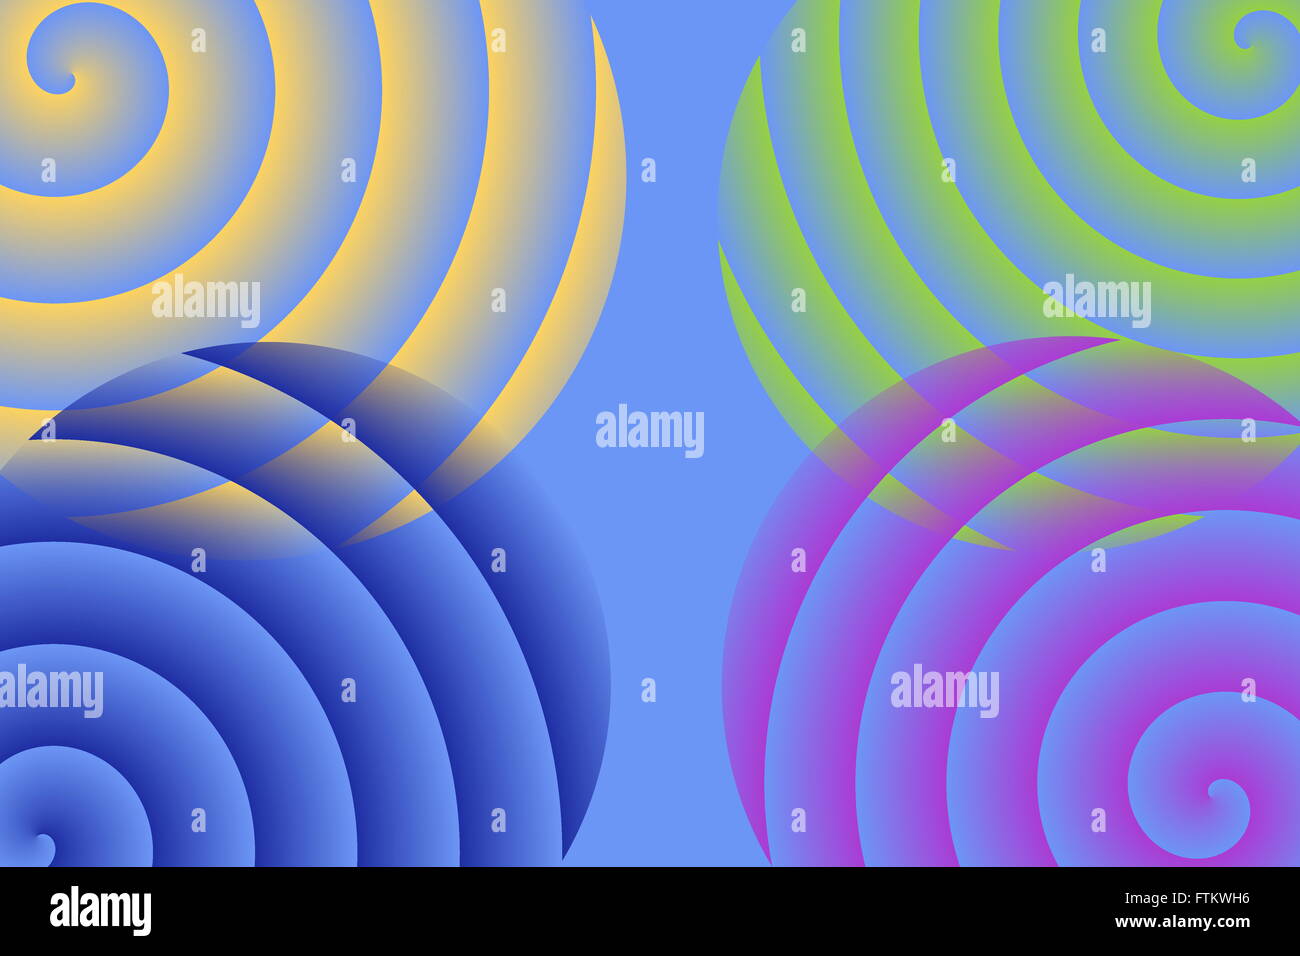 four spirals in yellow,blue,green and purple Stock Photo